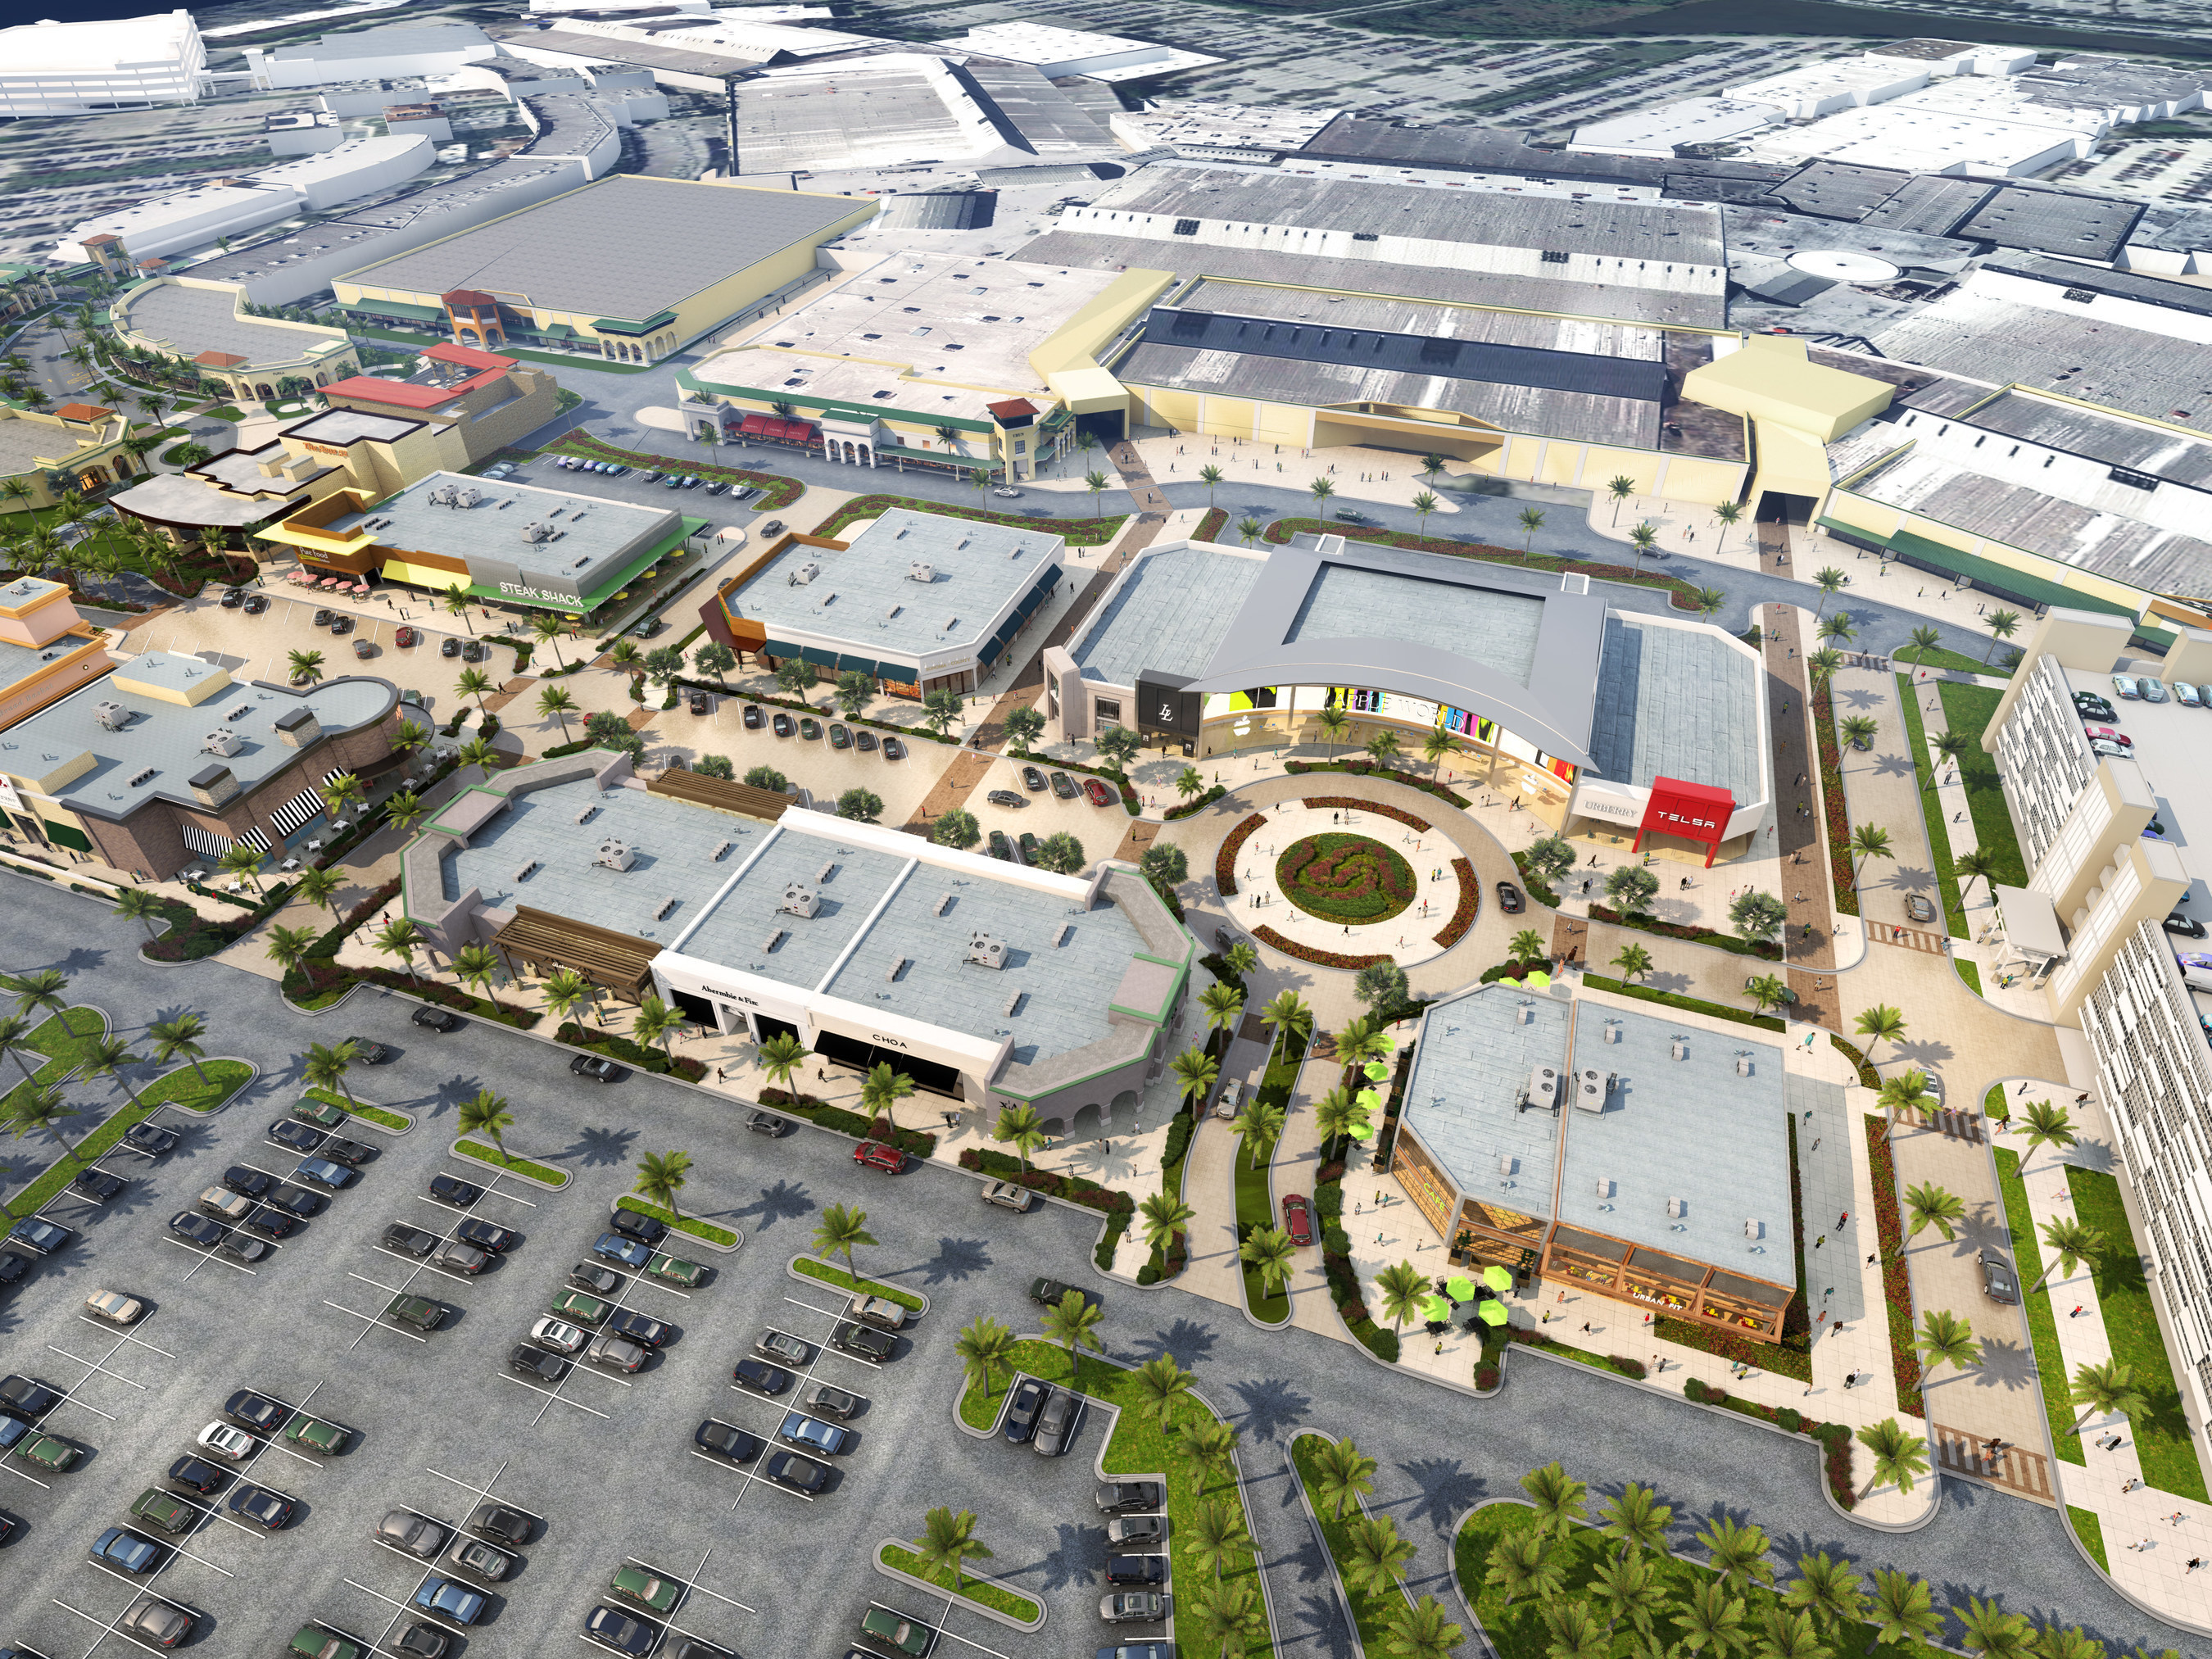 Overhead view of Town Center at Sawgrass